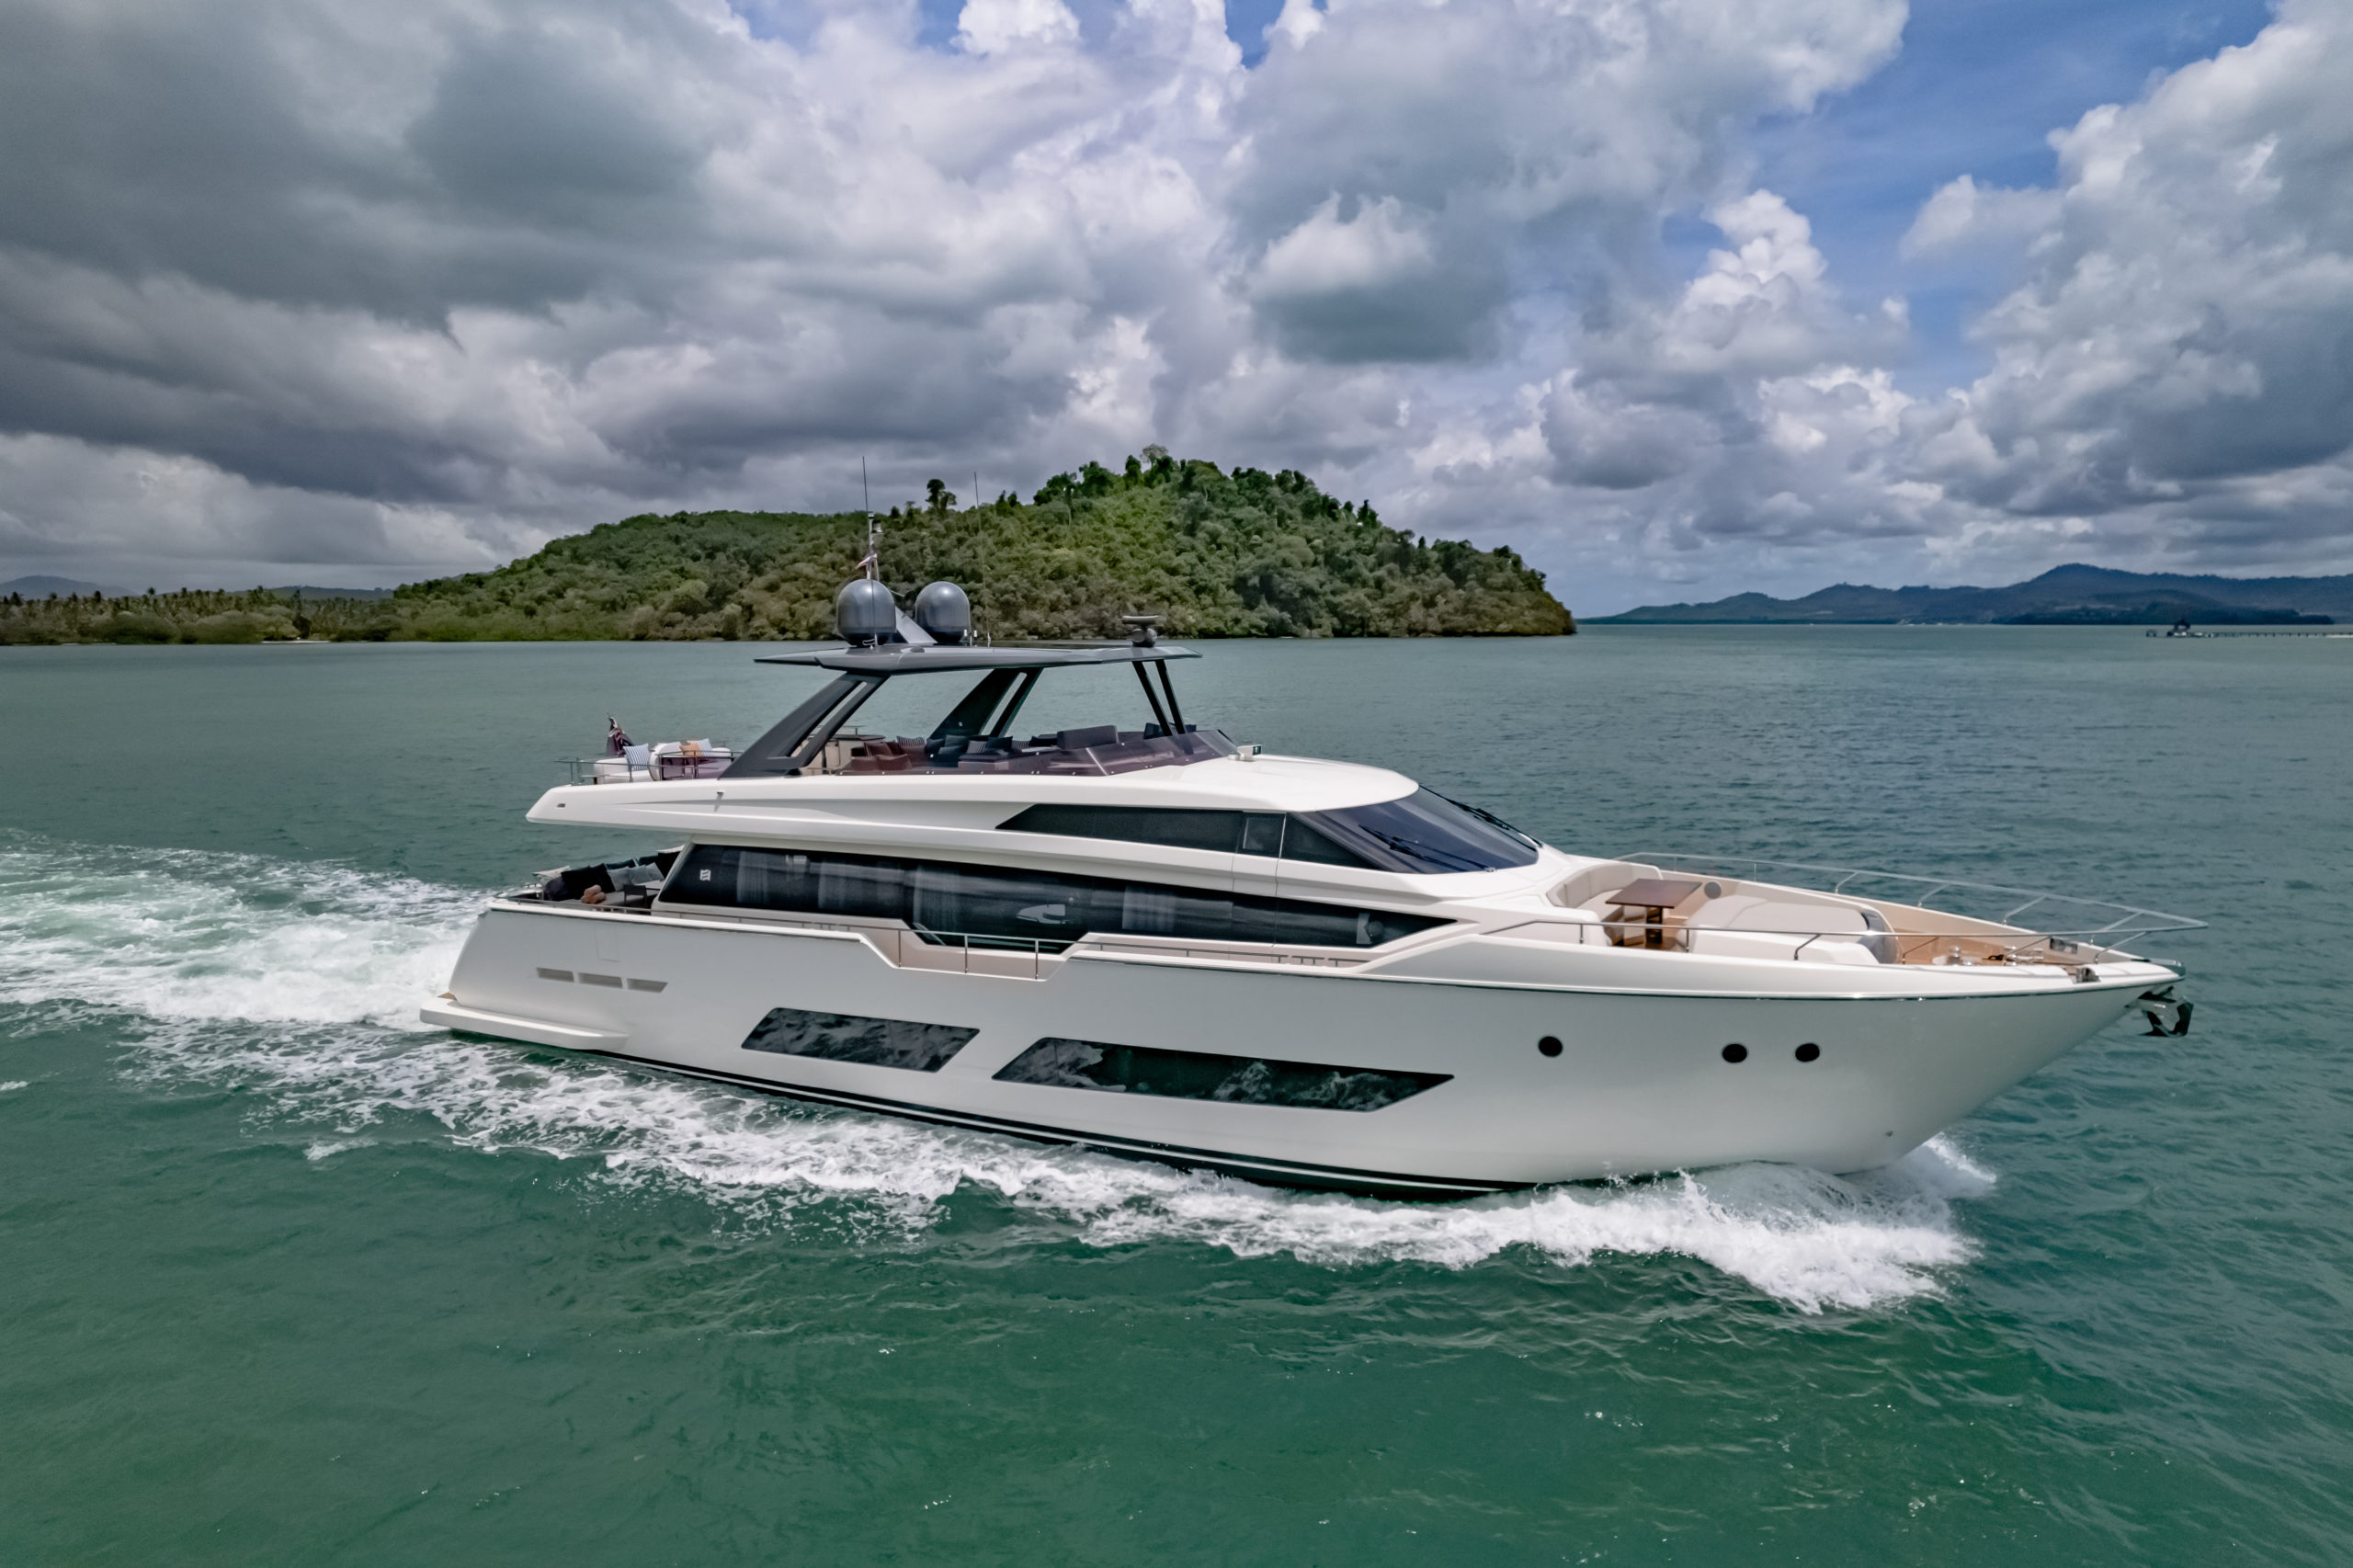 New Listing! Ferretti 850 is available now in Thailand